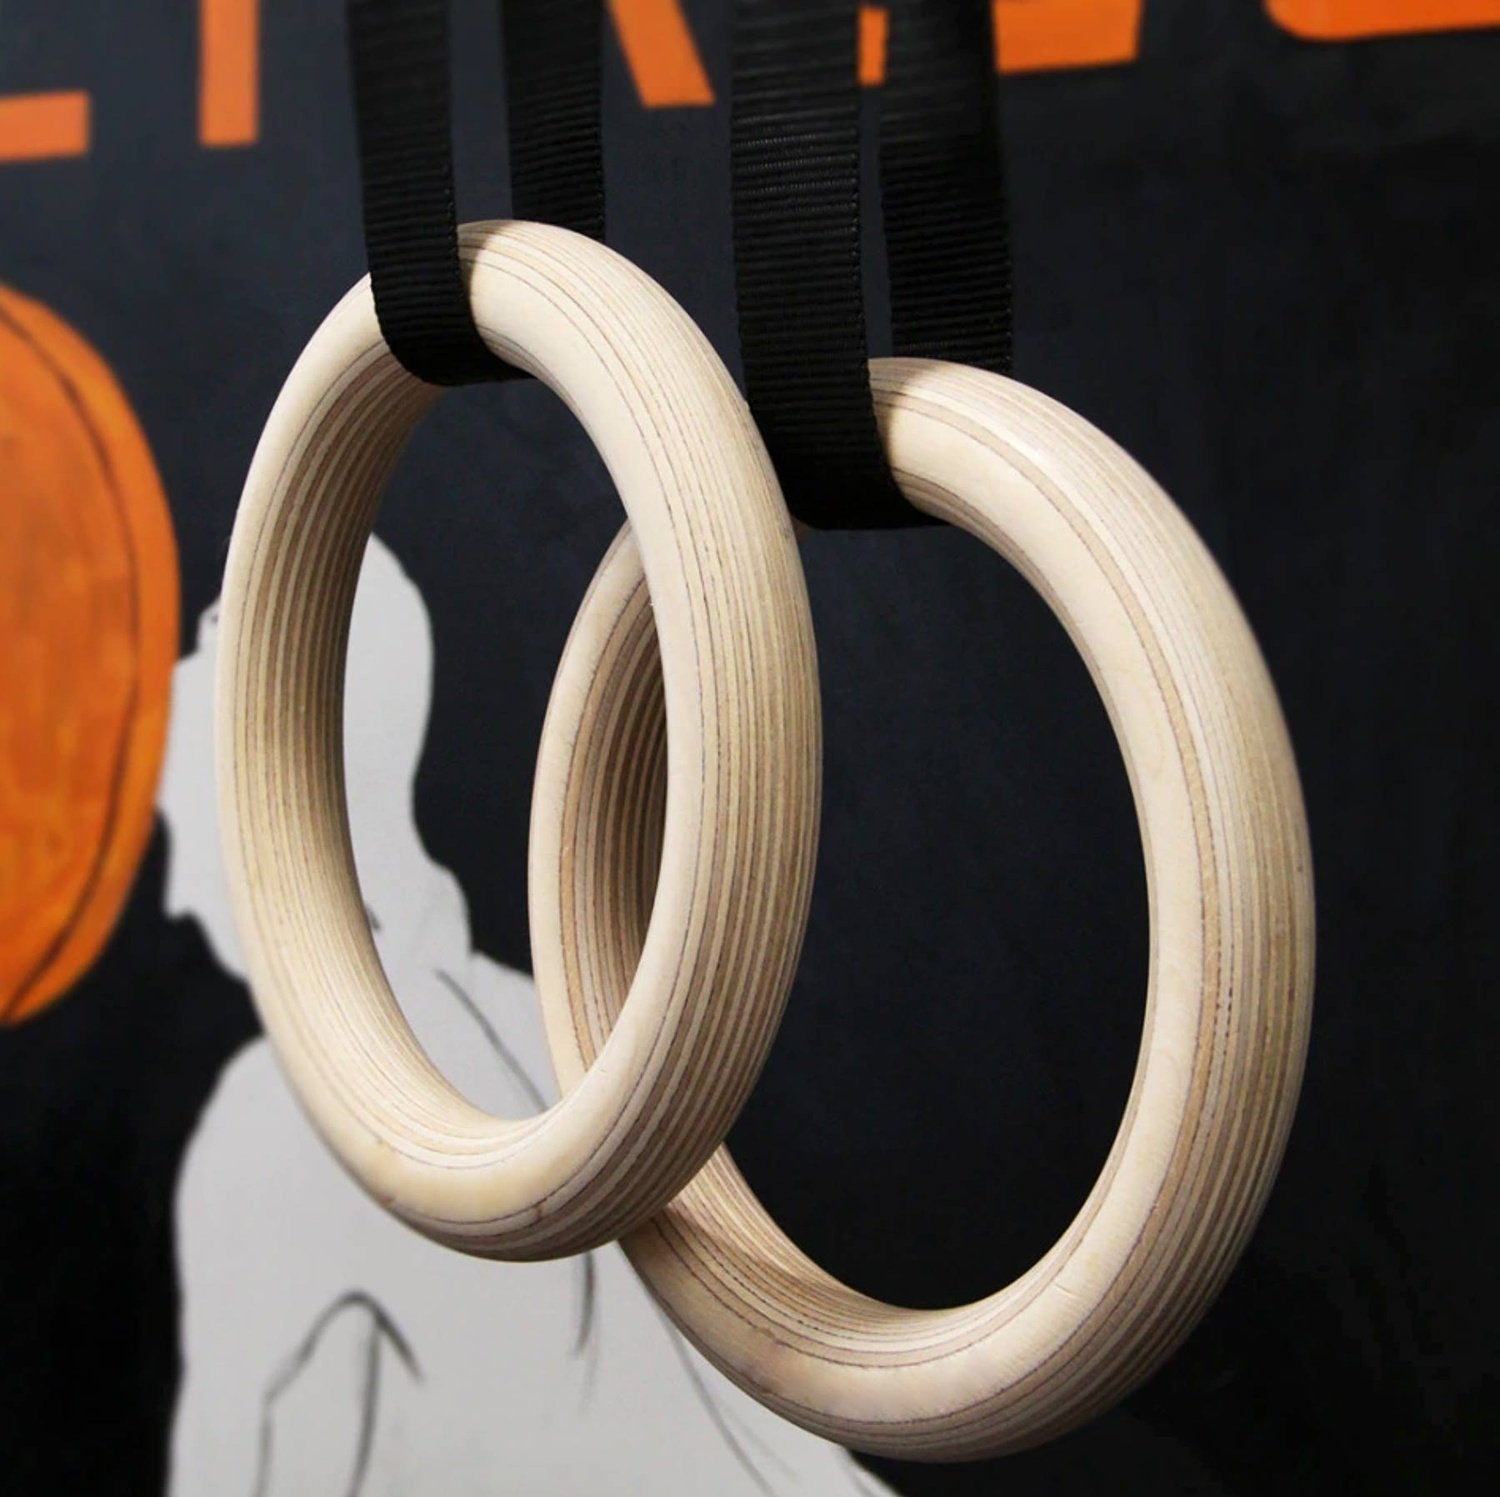 HighPowered Competition Gymnastics Rings (Fitnessringe Holz) kaufen bei HighPowered.ch